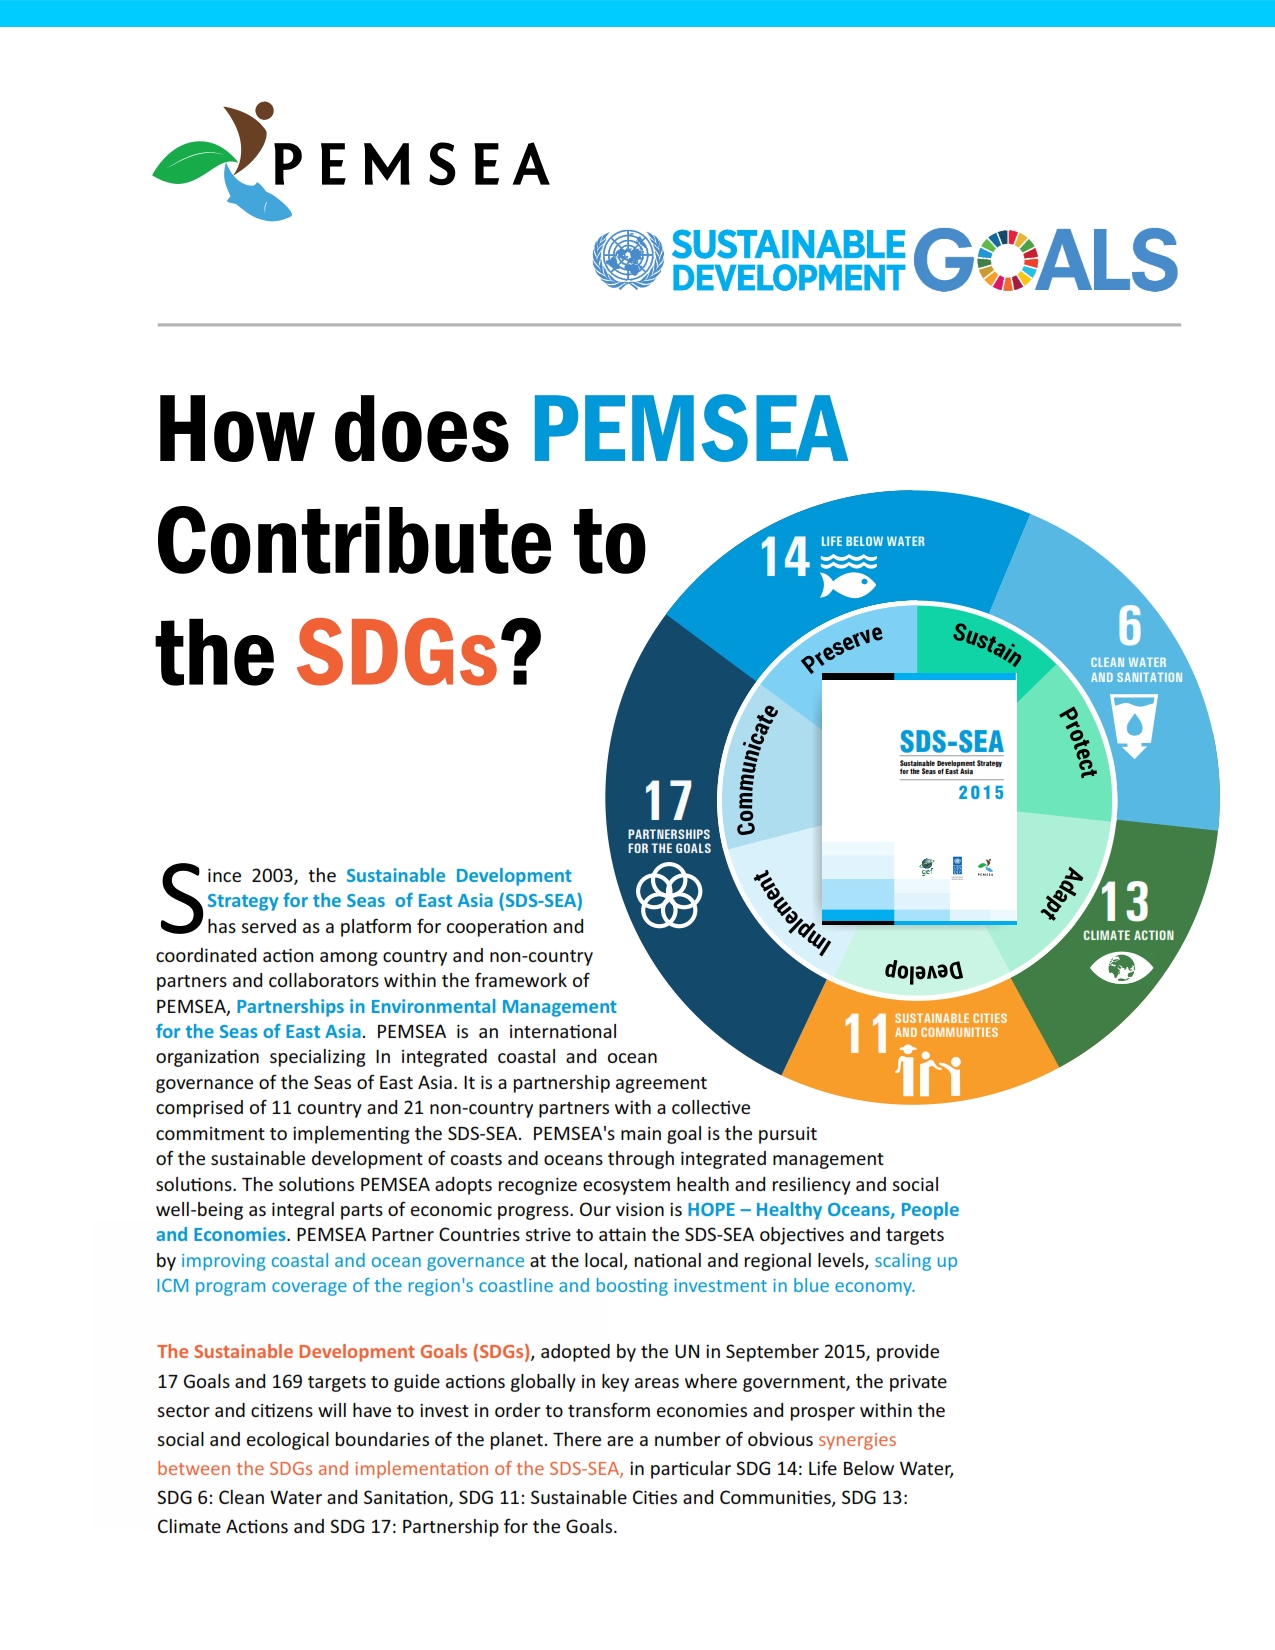 How does PEMSEA Contribute to the SDGs